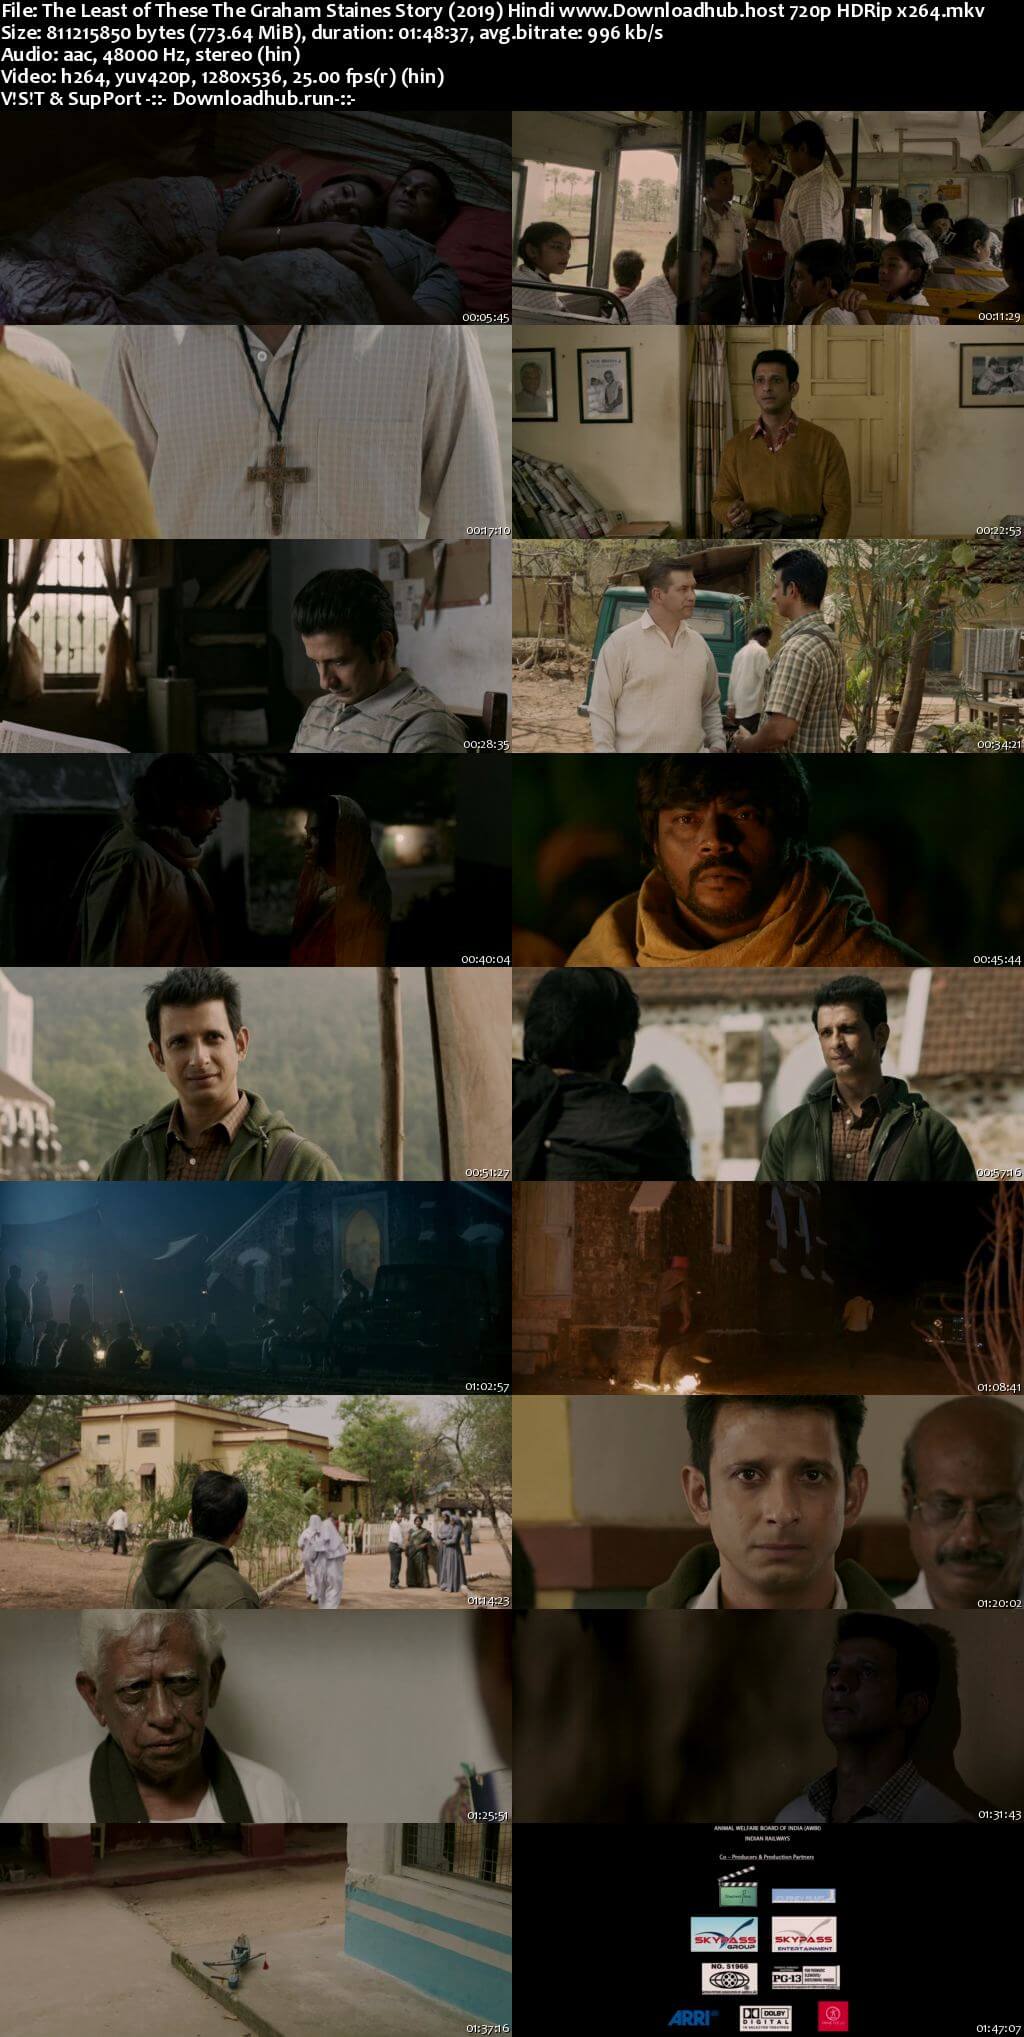 The Least of These The Graham Staines Story 2019 Hindi 720p HDRip x264